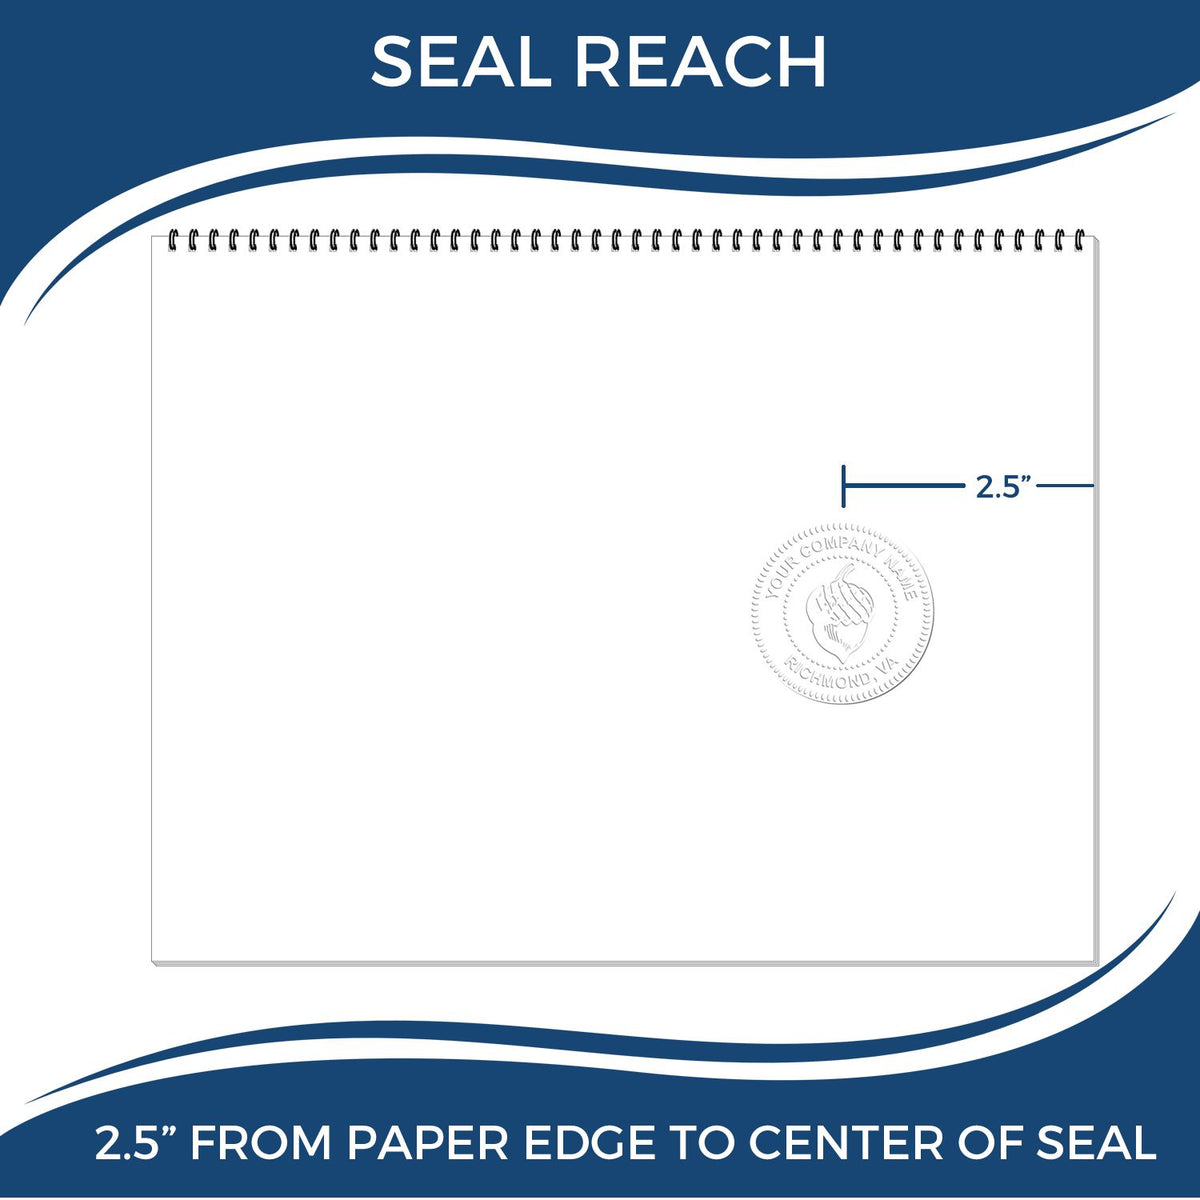 An infographic showing the seal reach which is represented by a ruler and a miniature seal image of the Heavy Duty Cast Iron Indiana Engineer Seal Embosser